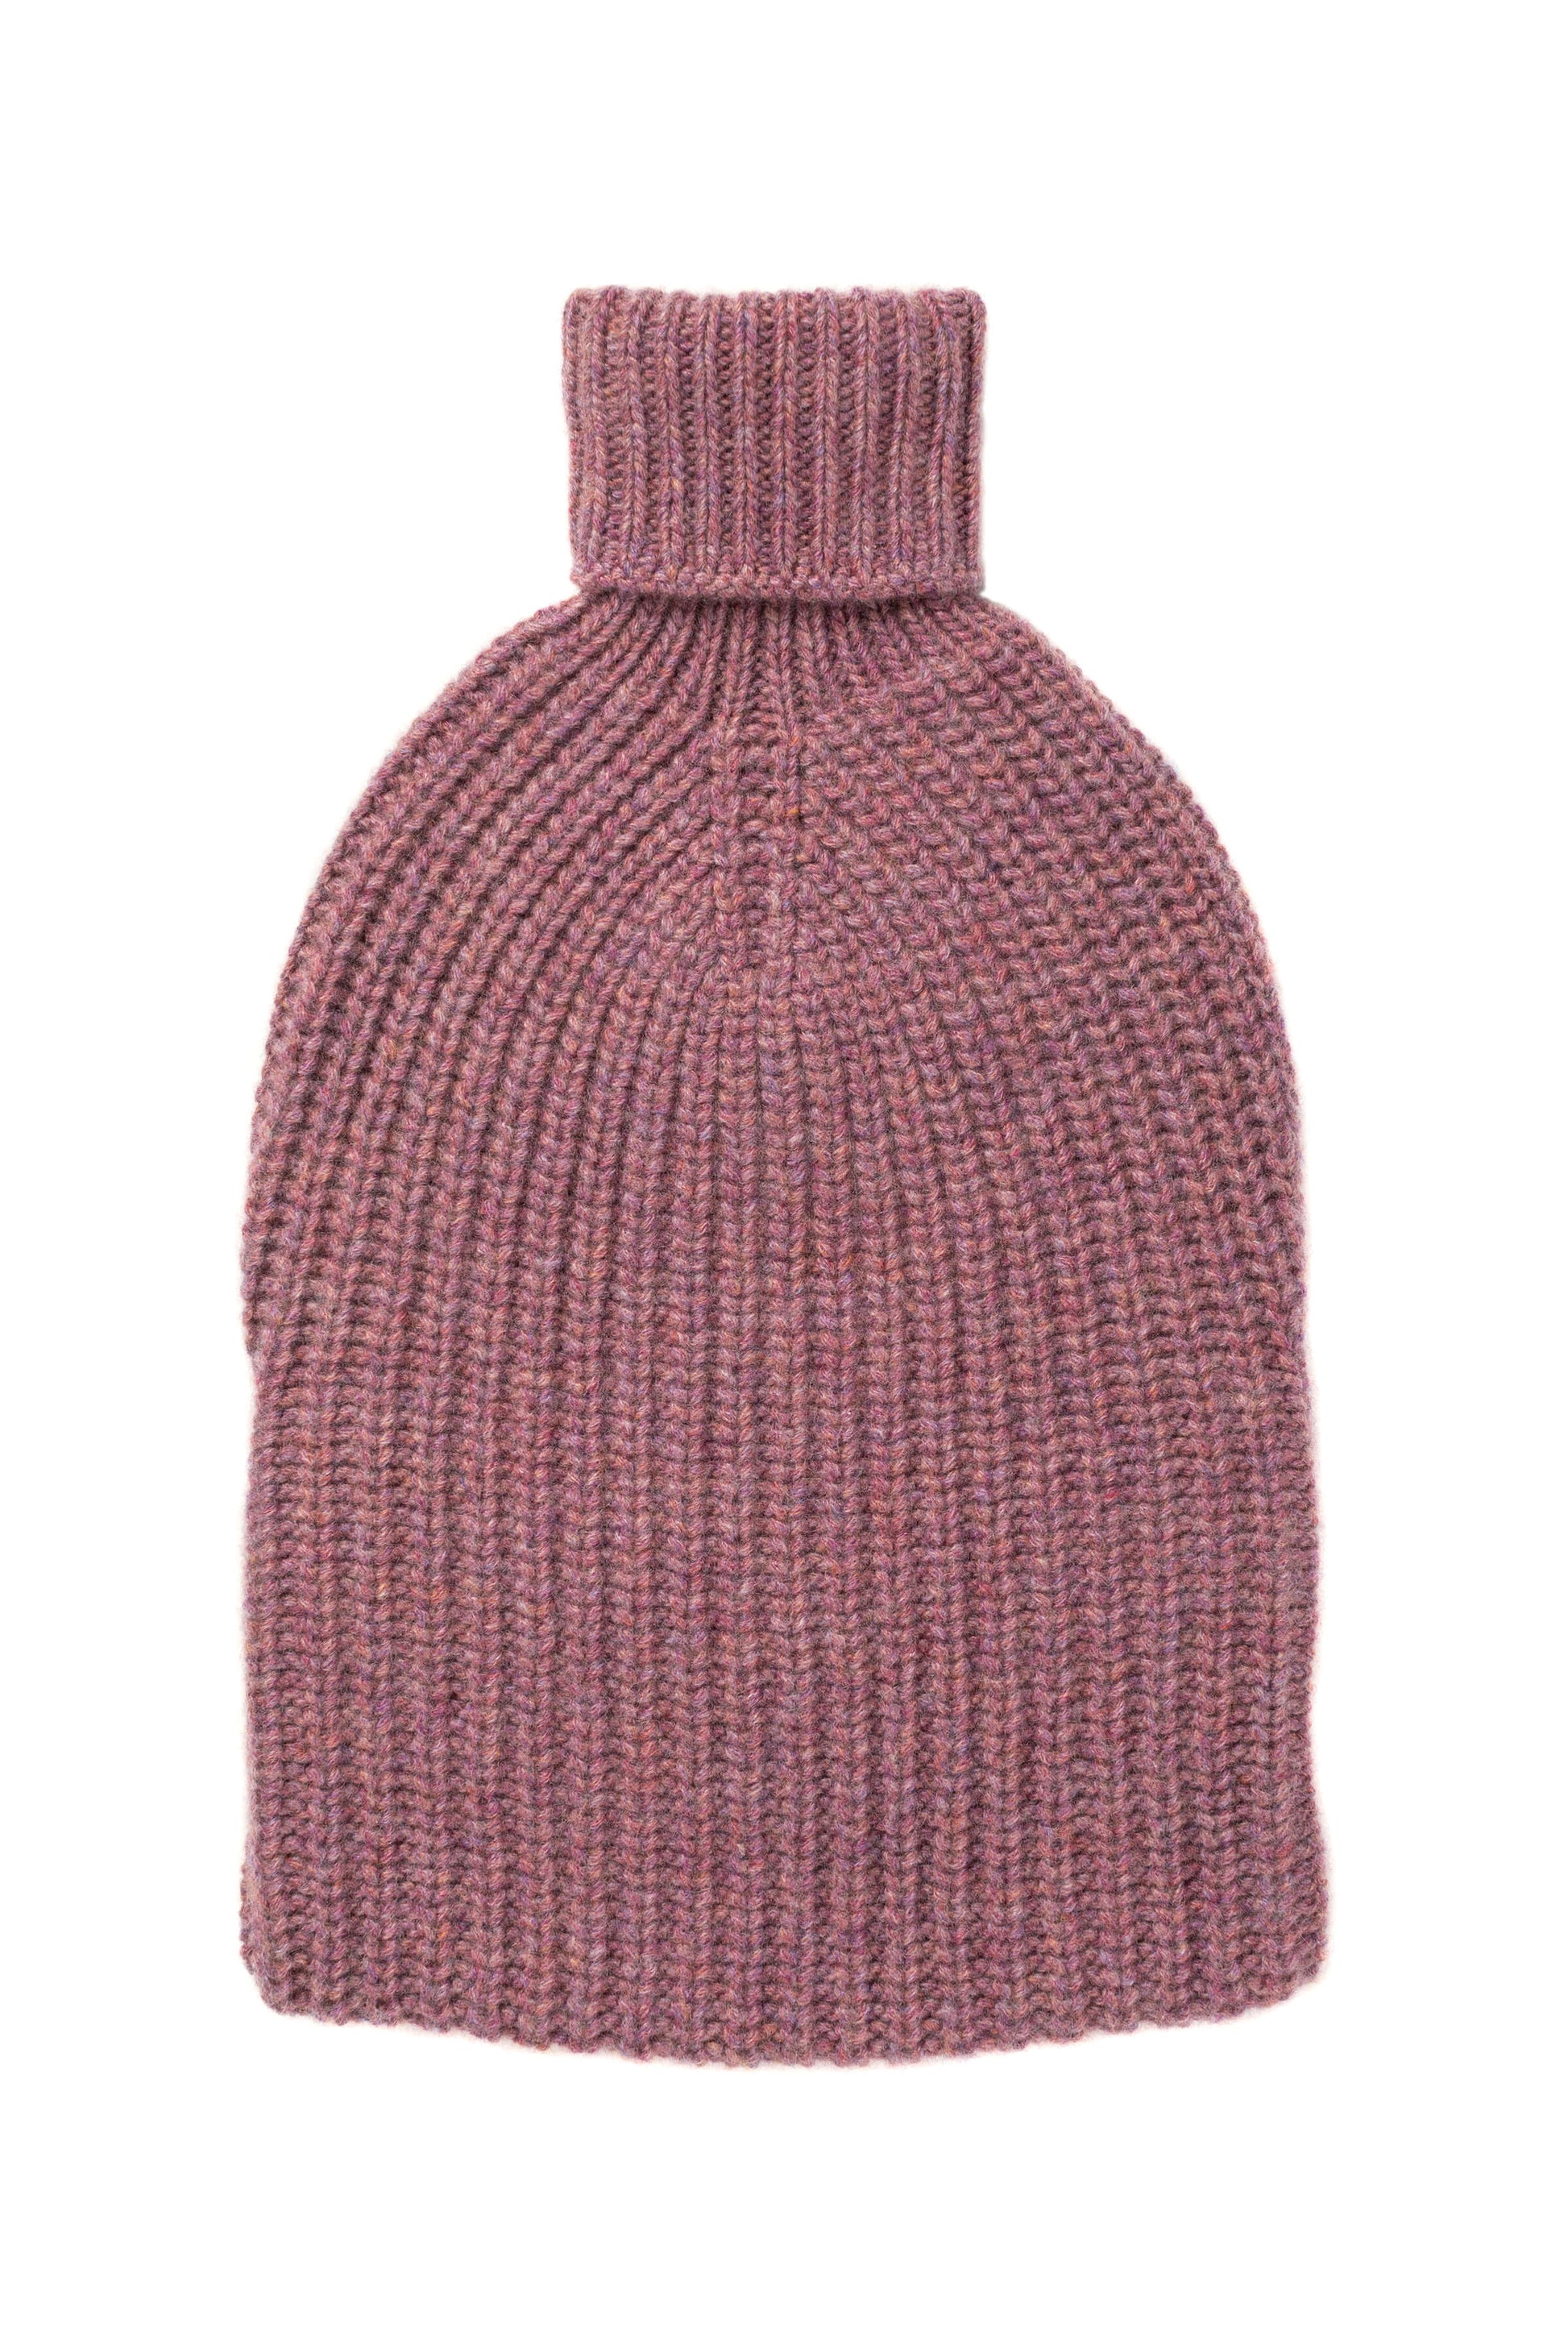 Johnstons of Elgin Cashmere Accessories Heather Purple Ribbed Cashmere Hot Water Bottle PA000062HE4307